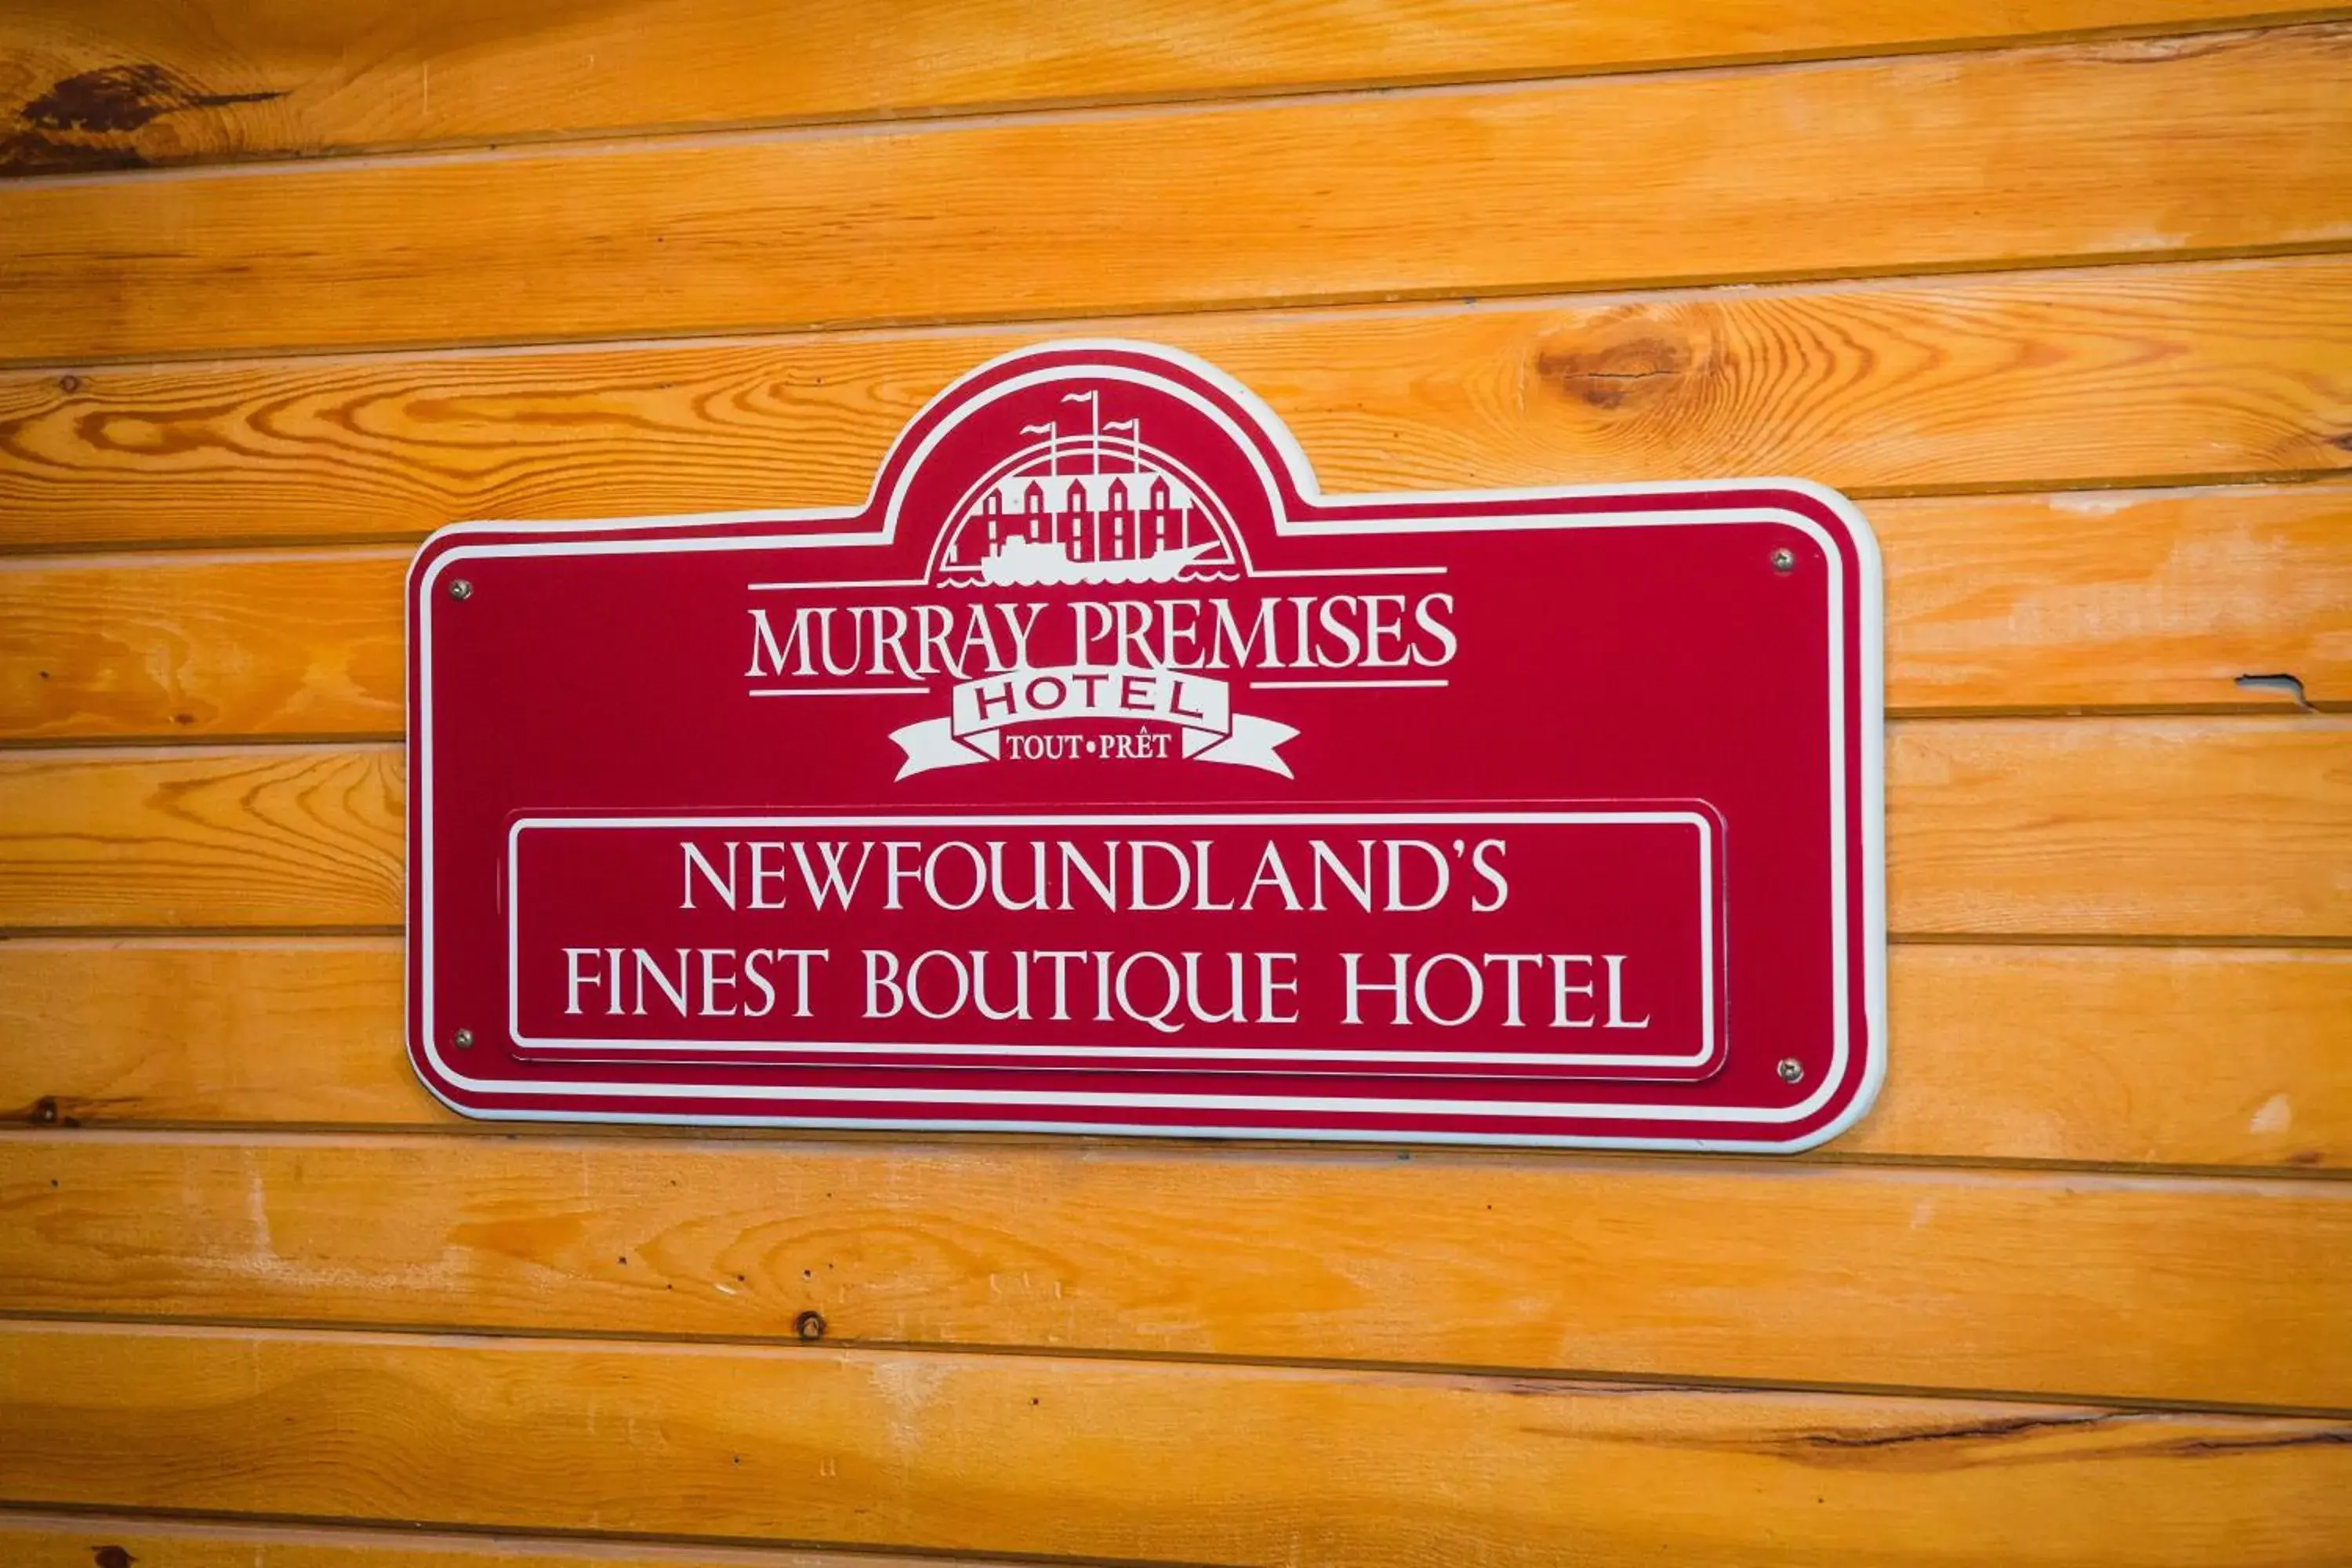 Property logo or sign in Murray Premises Hotel